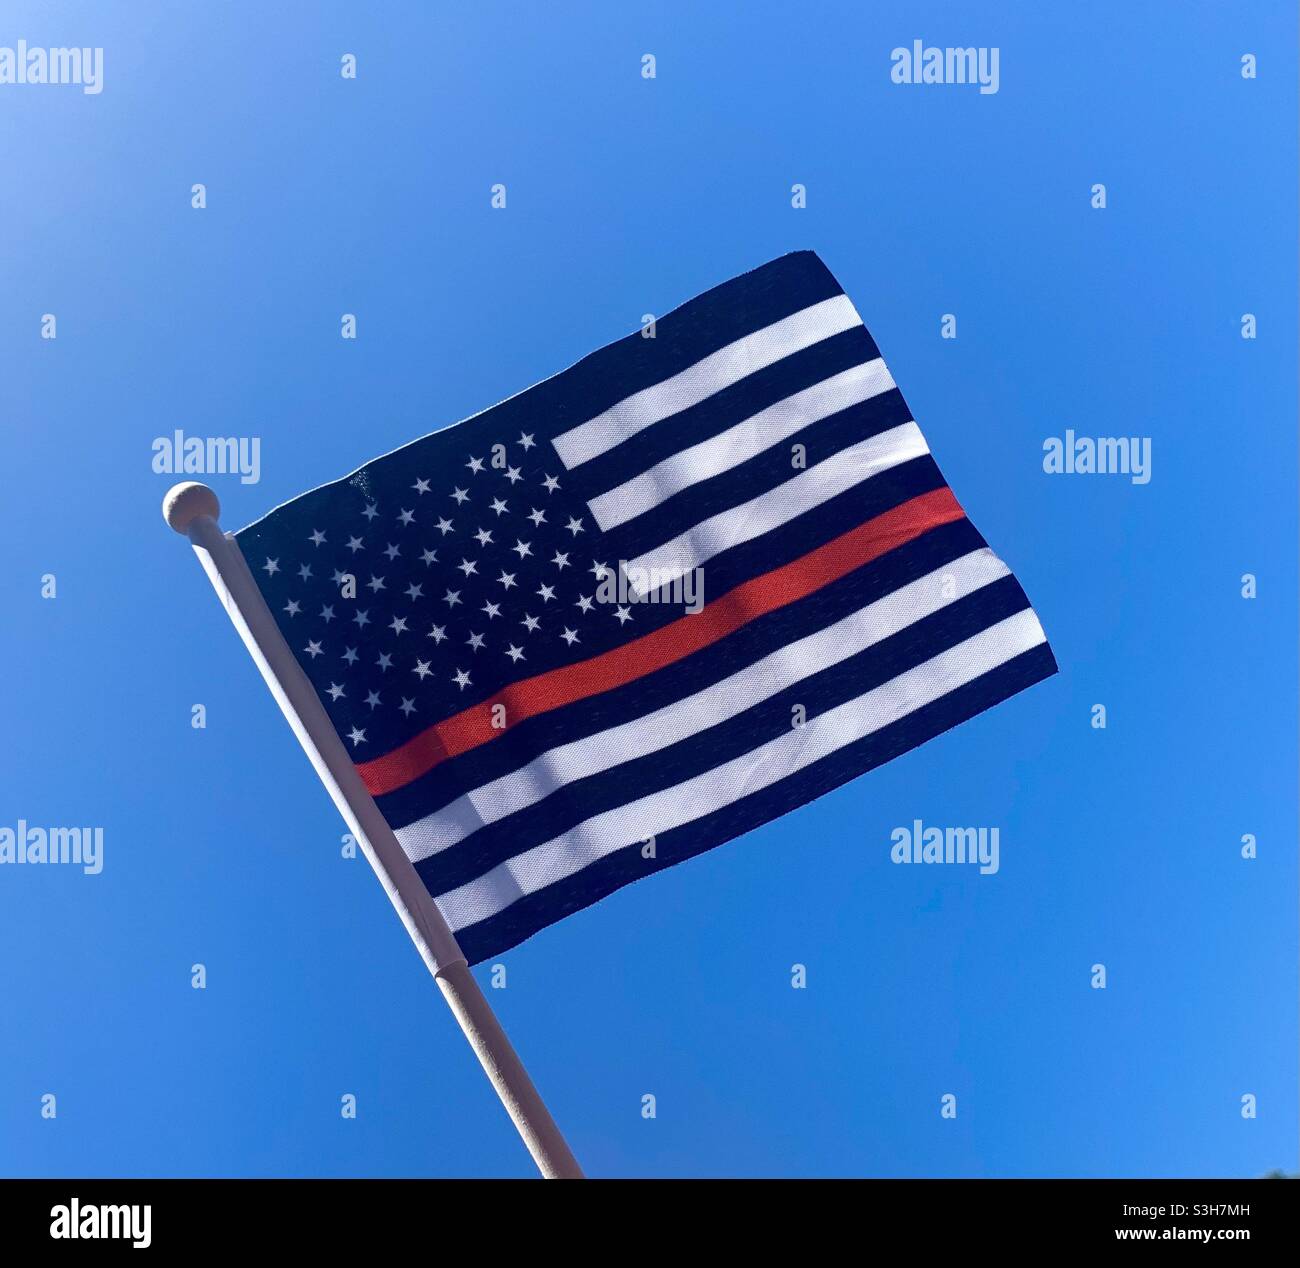 Back the blue - American flag supporting our police Stock Photo